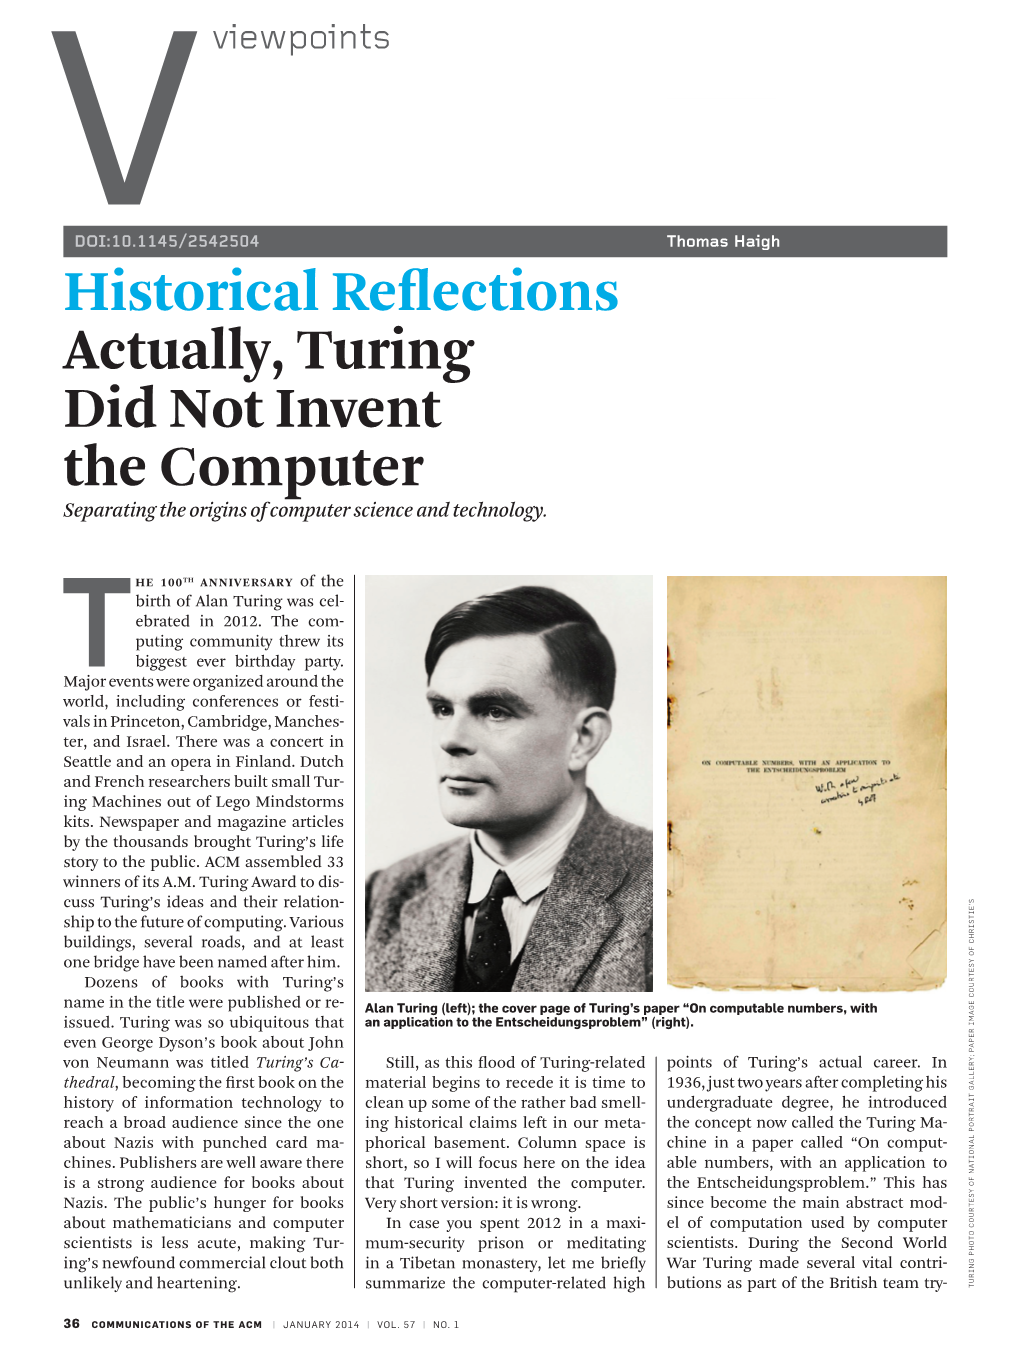 Historical Reflections Actually, Turing Did Not Invent the Computer Separating the Origins of Computer Science and Technology